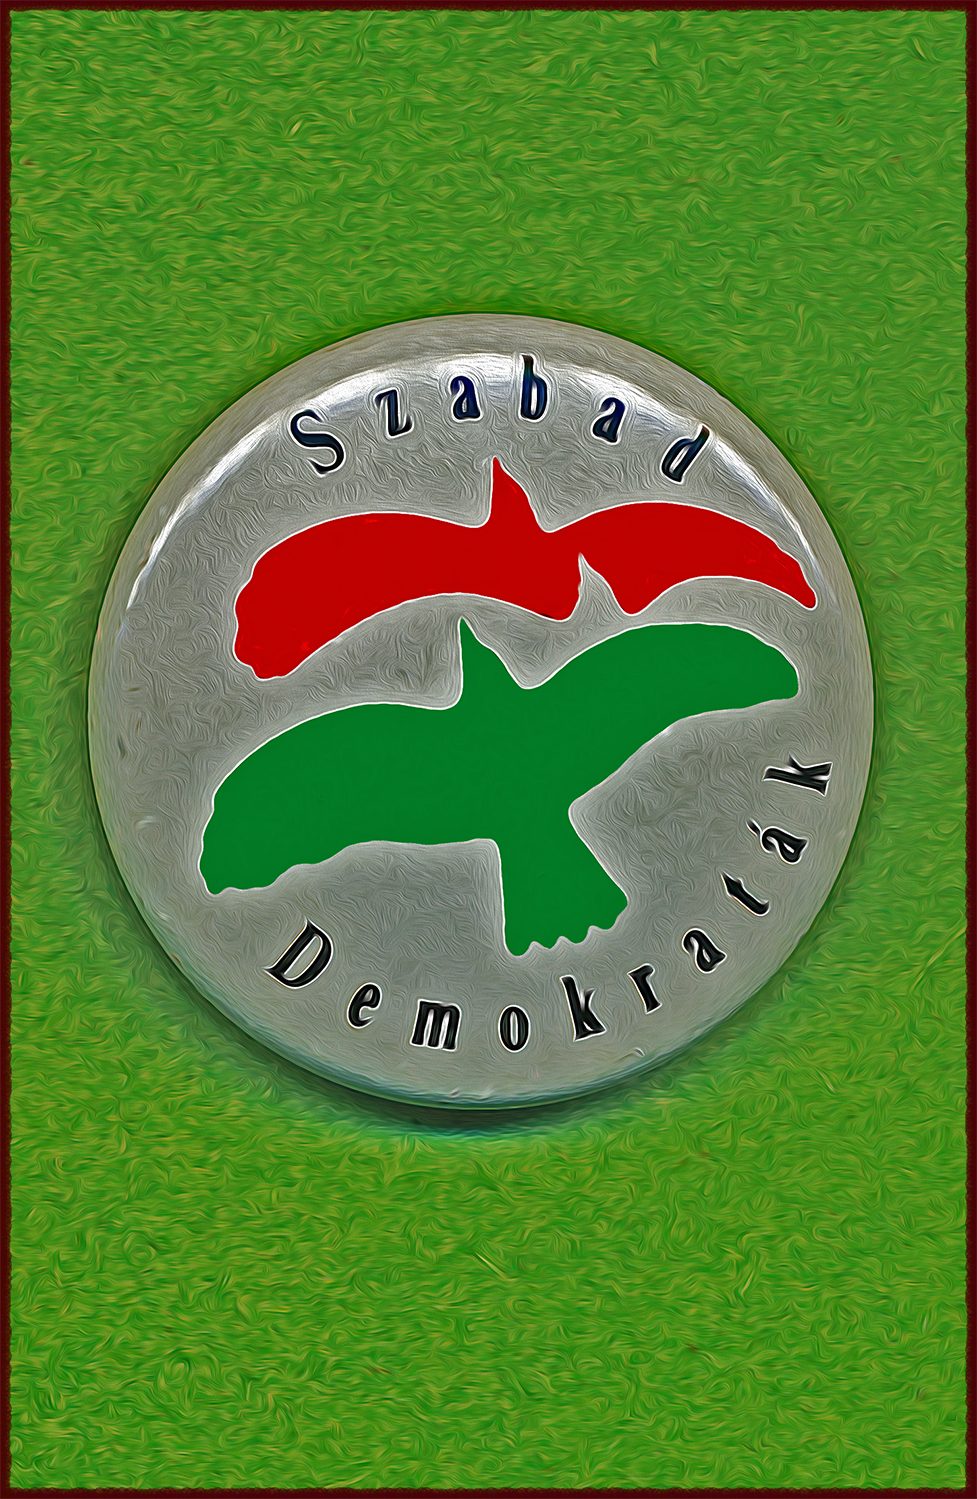 a campaign button for Szabad Demokratak political party in Gyor Hungary 1990